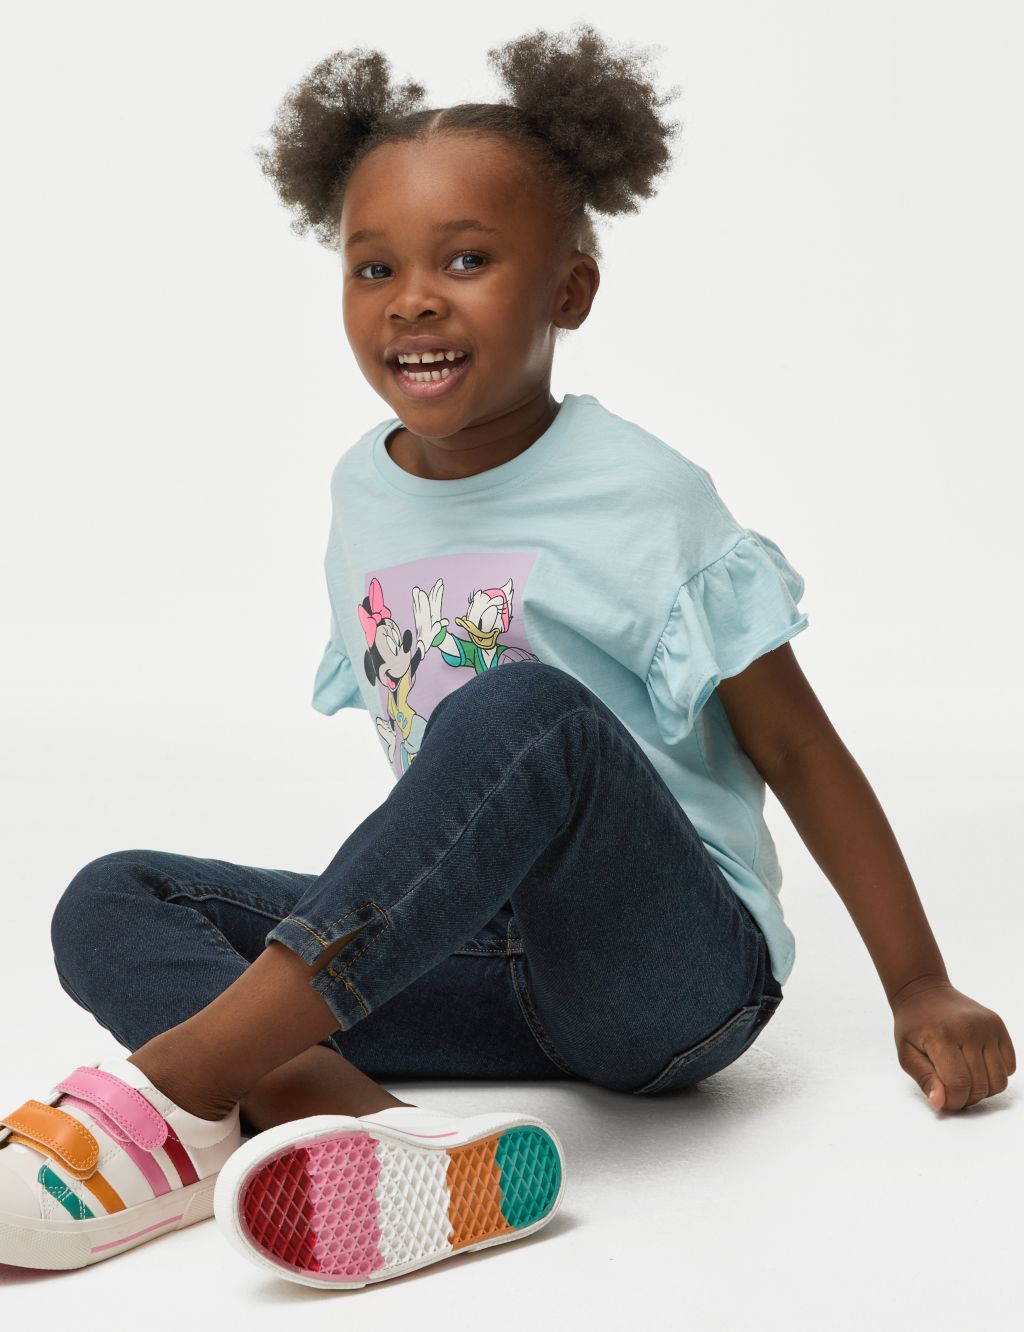 MIX MODAL KIDS PRINTED JEGGINGS, Size: S/M/L ( 60/70/80 Size ) at